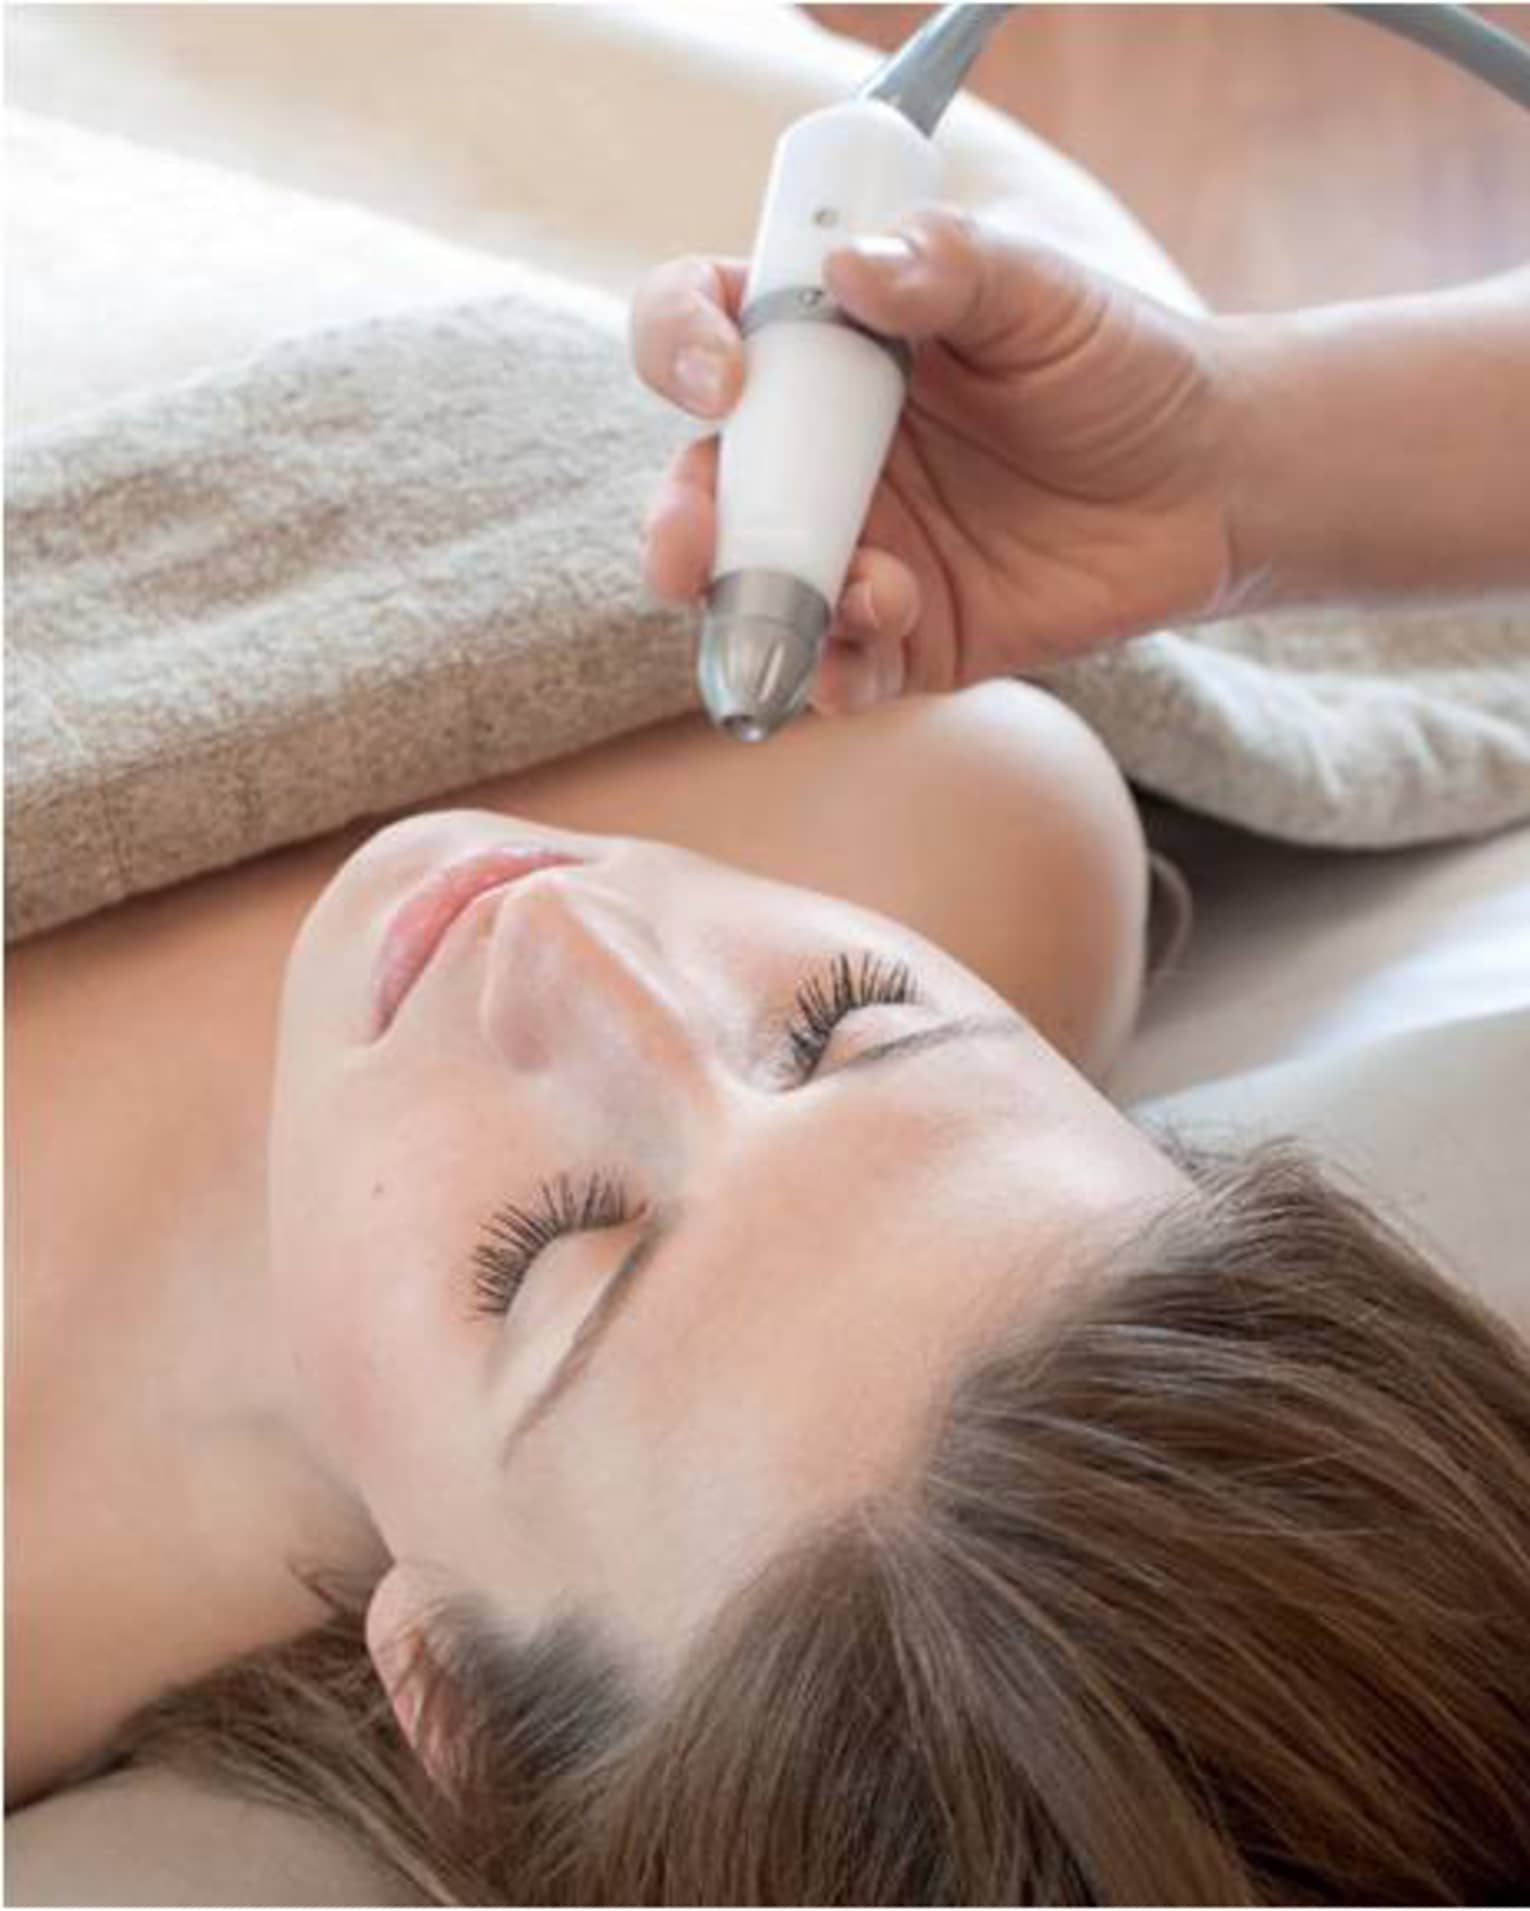 A woman in a spa getting a laser treatment on her face, the staff member is holding the device.